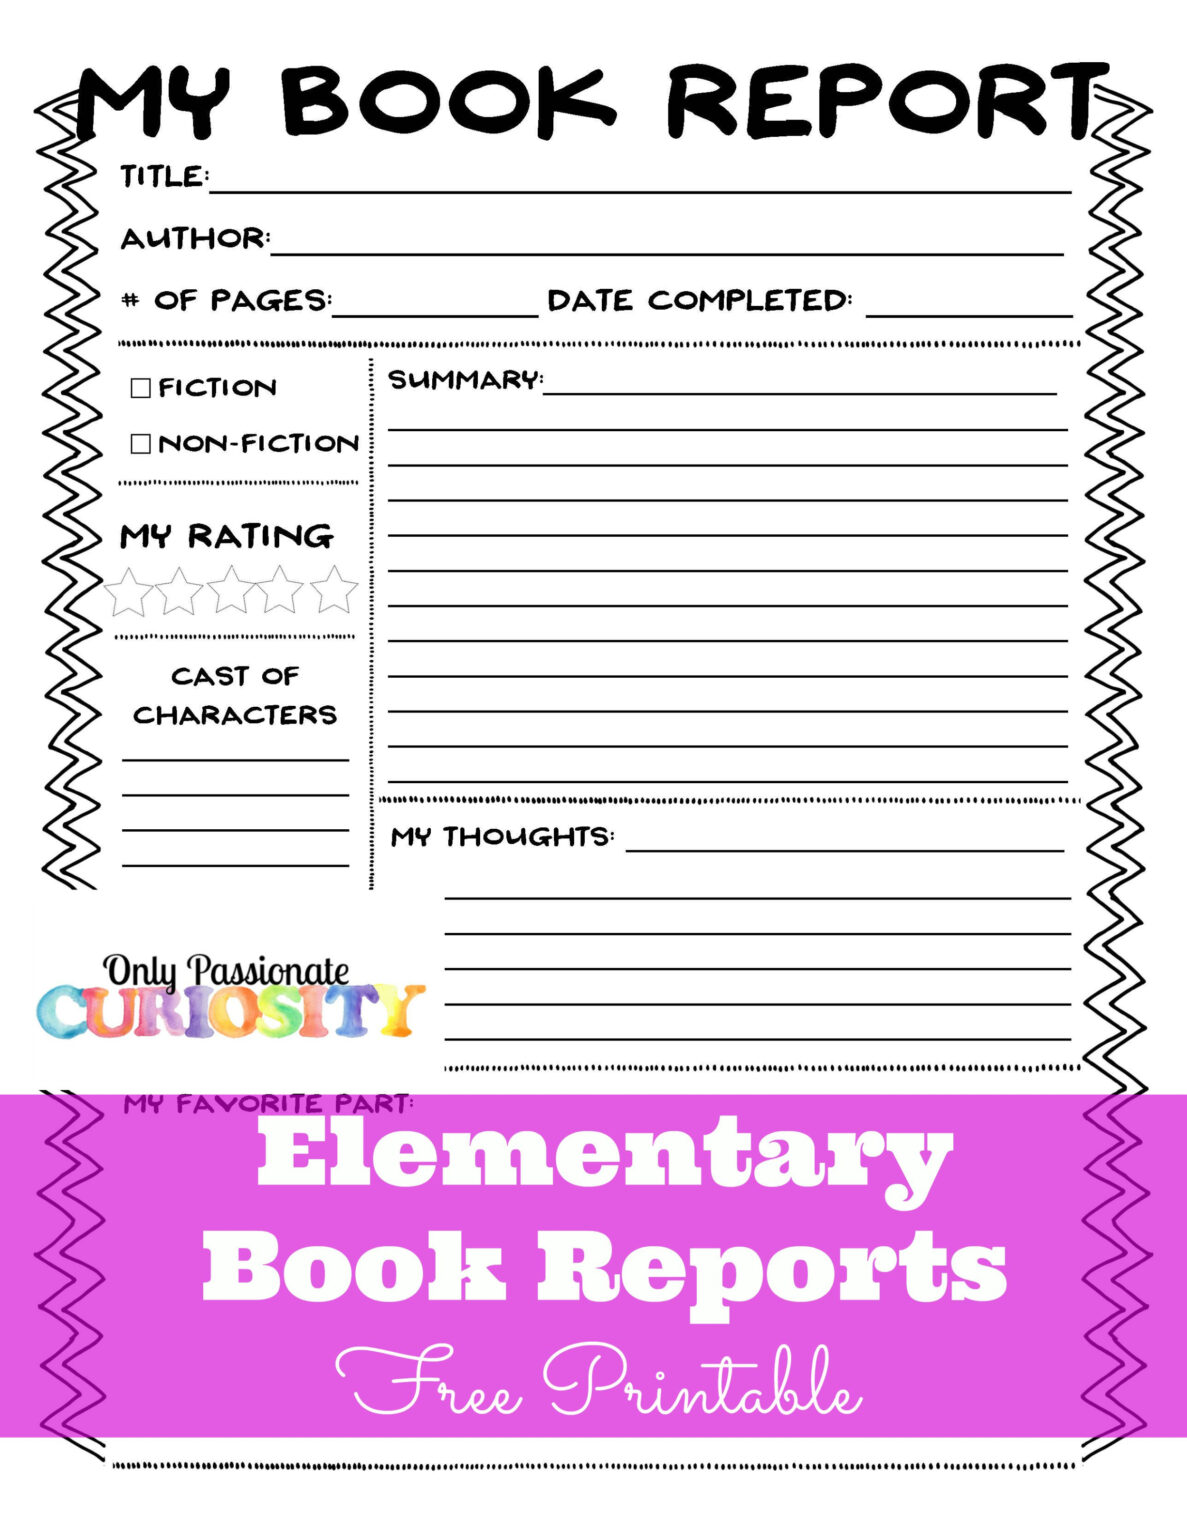 how to write a book report in 5th grade